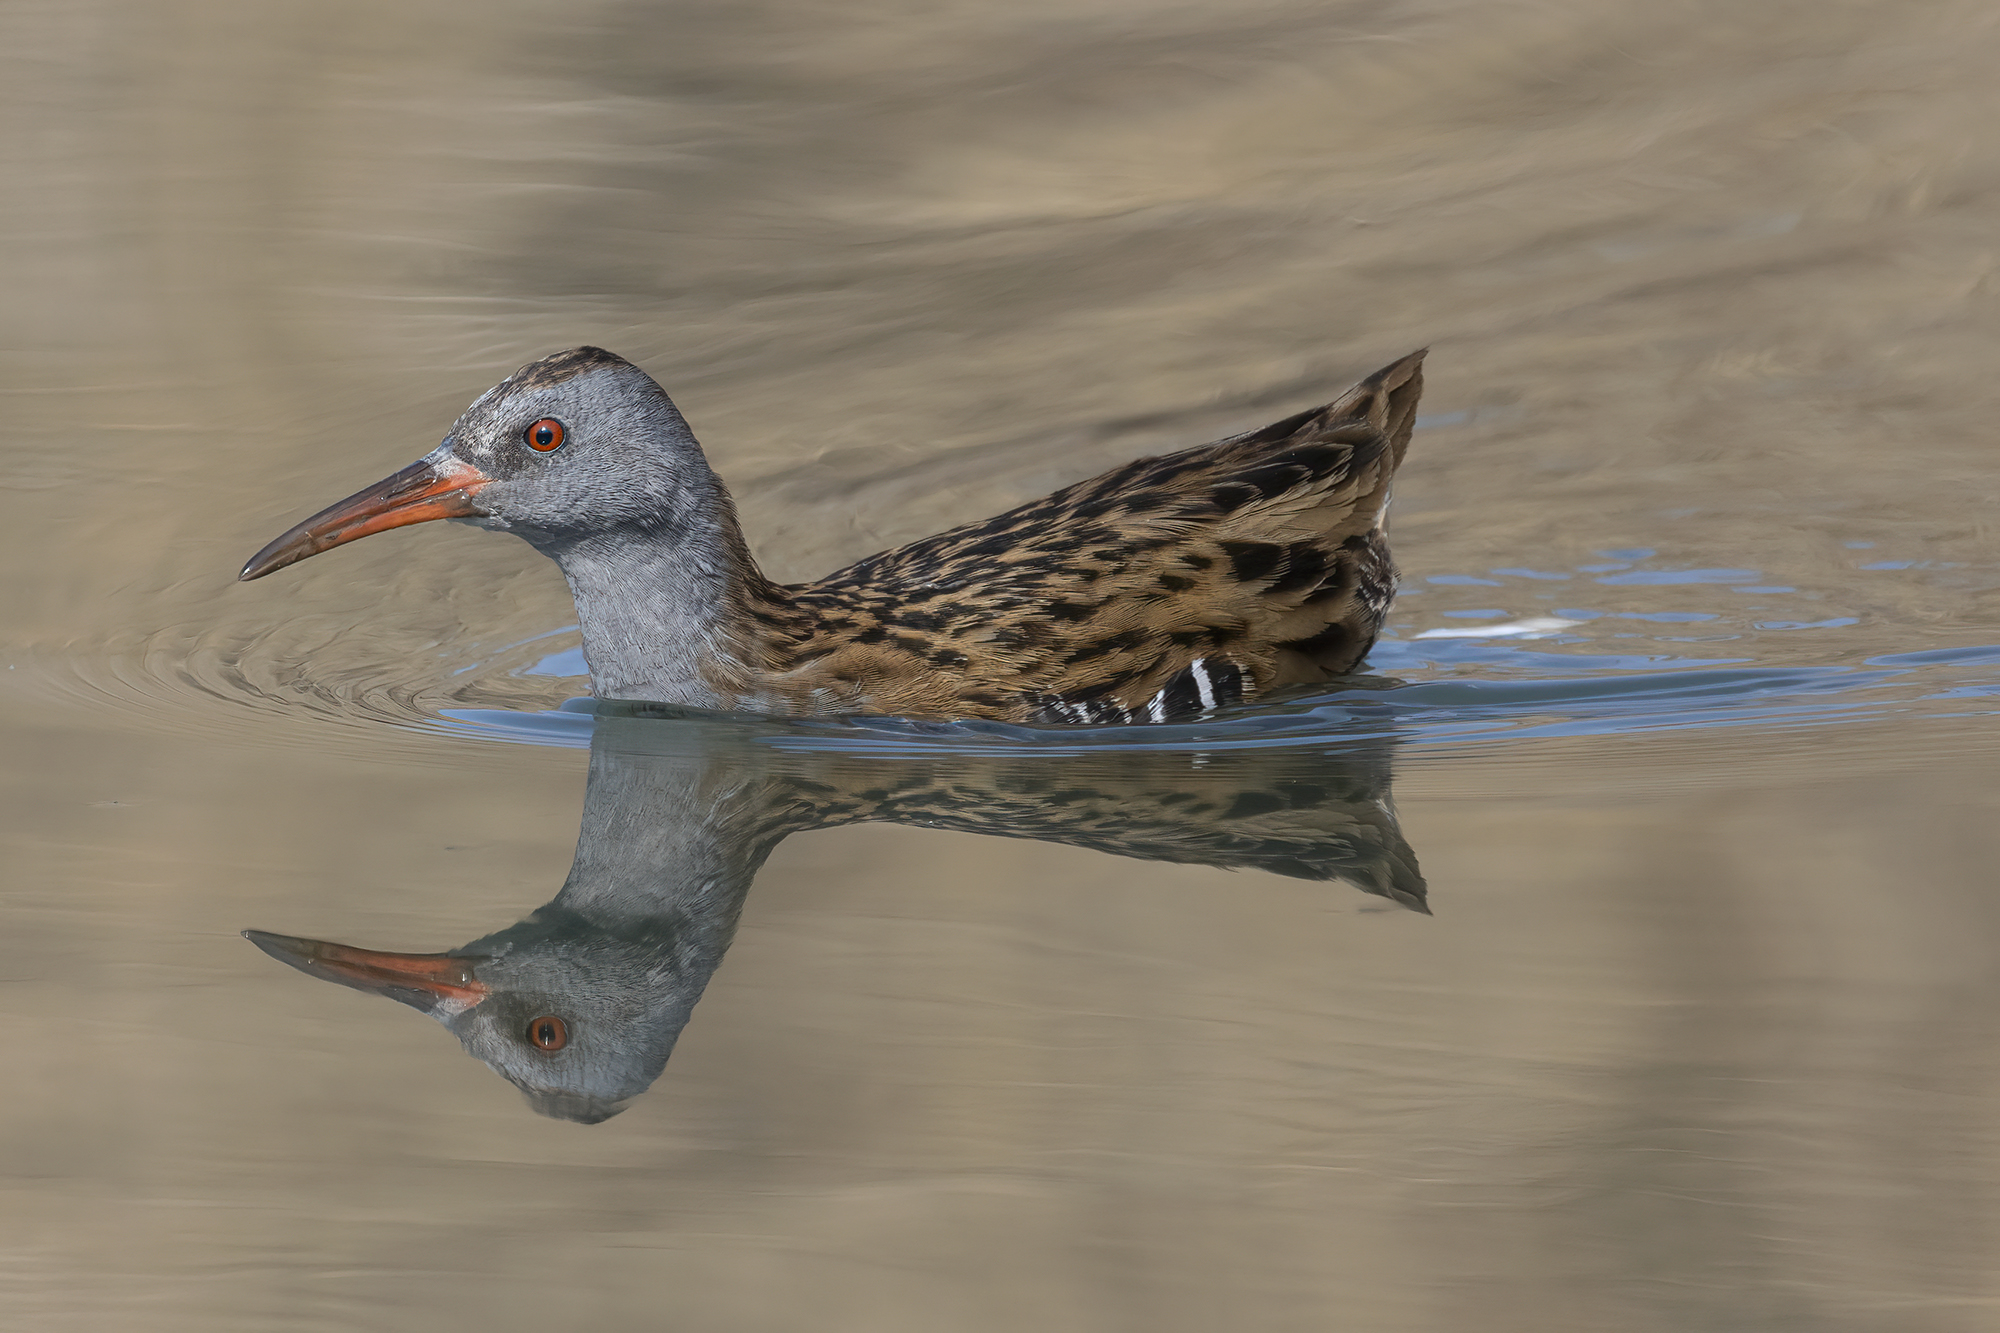 Swimming is sweet to me, water rail...